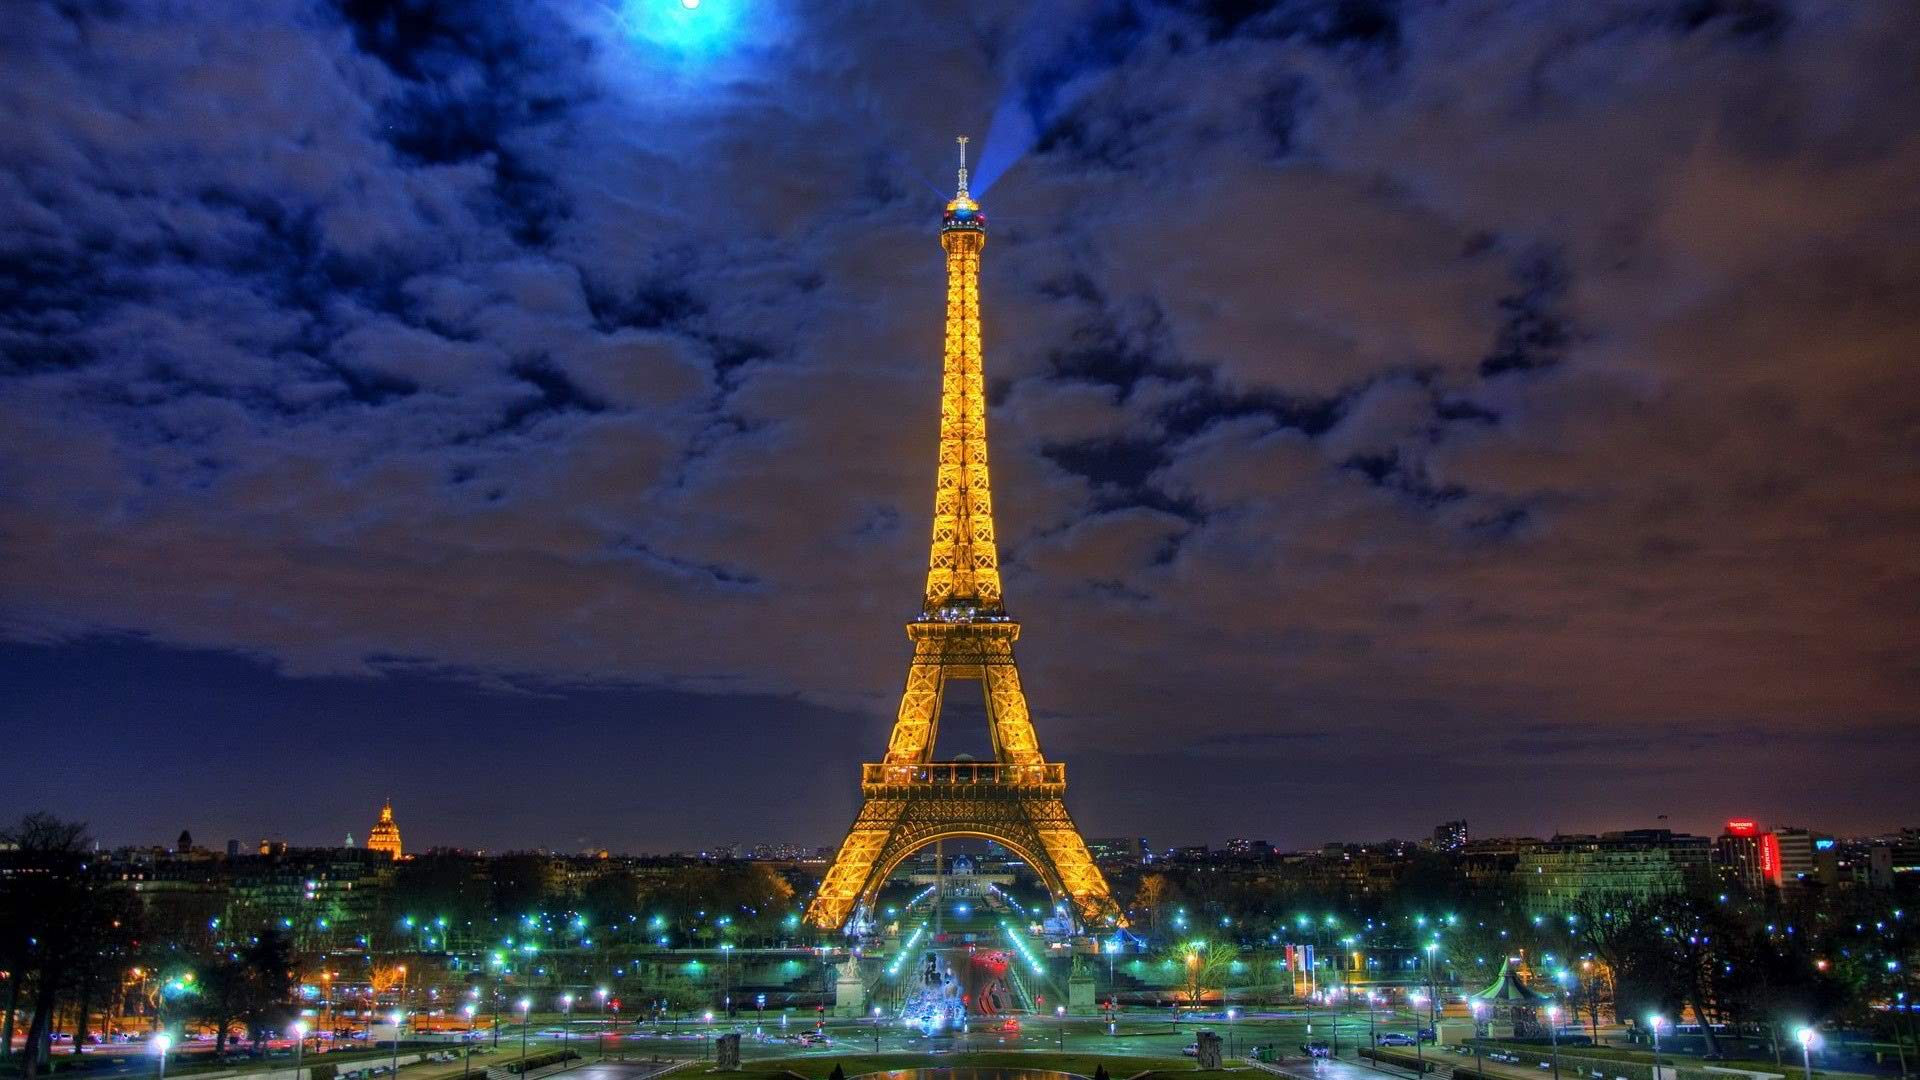 cloudy weather hd paris wallpapers